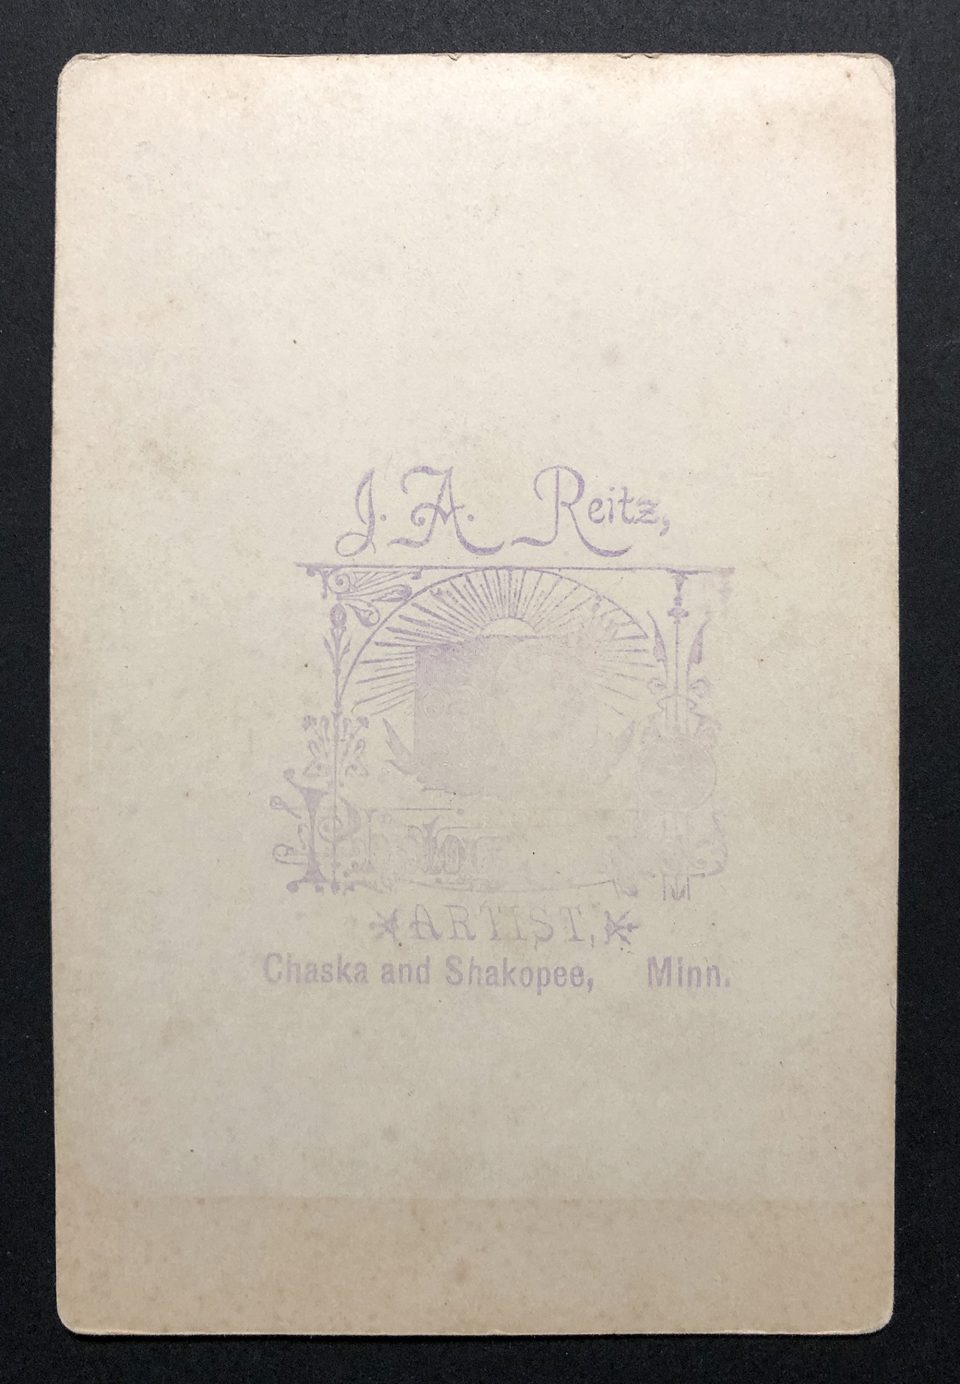 The artist's imprint on the back of the cabinet card appears to be hand stamped with purple ink.